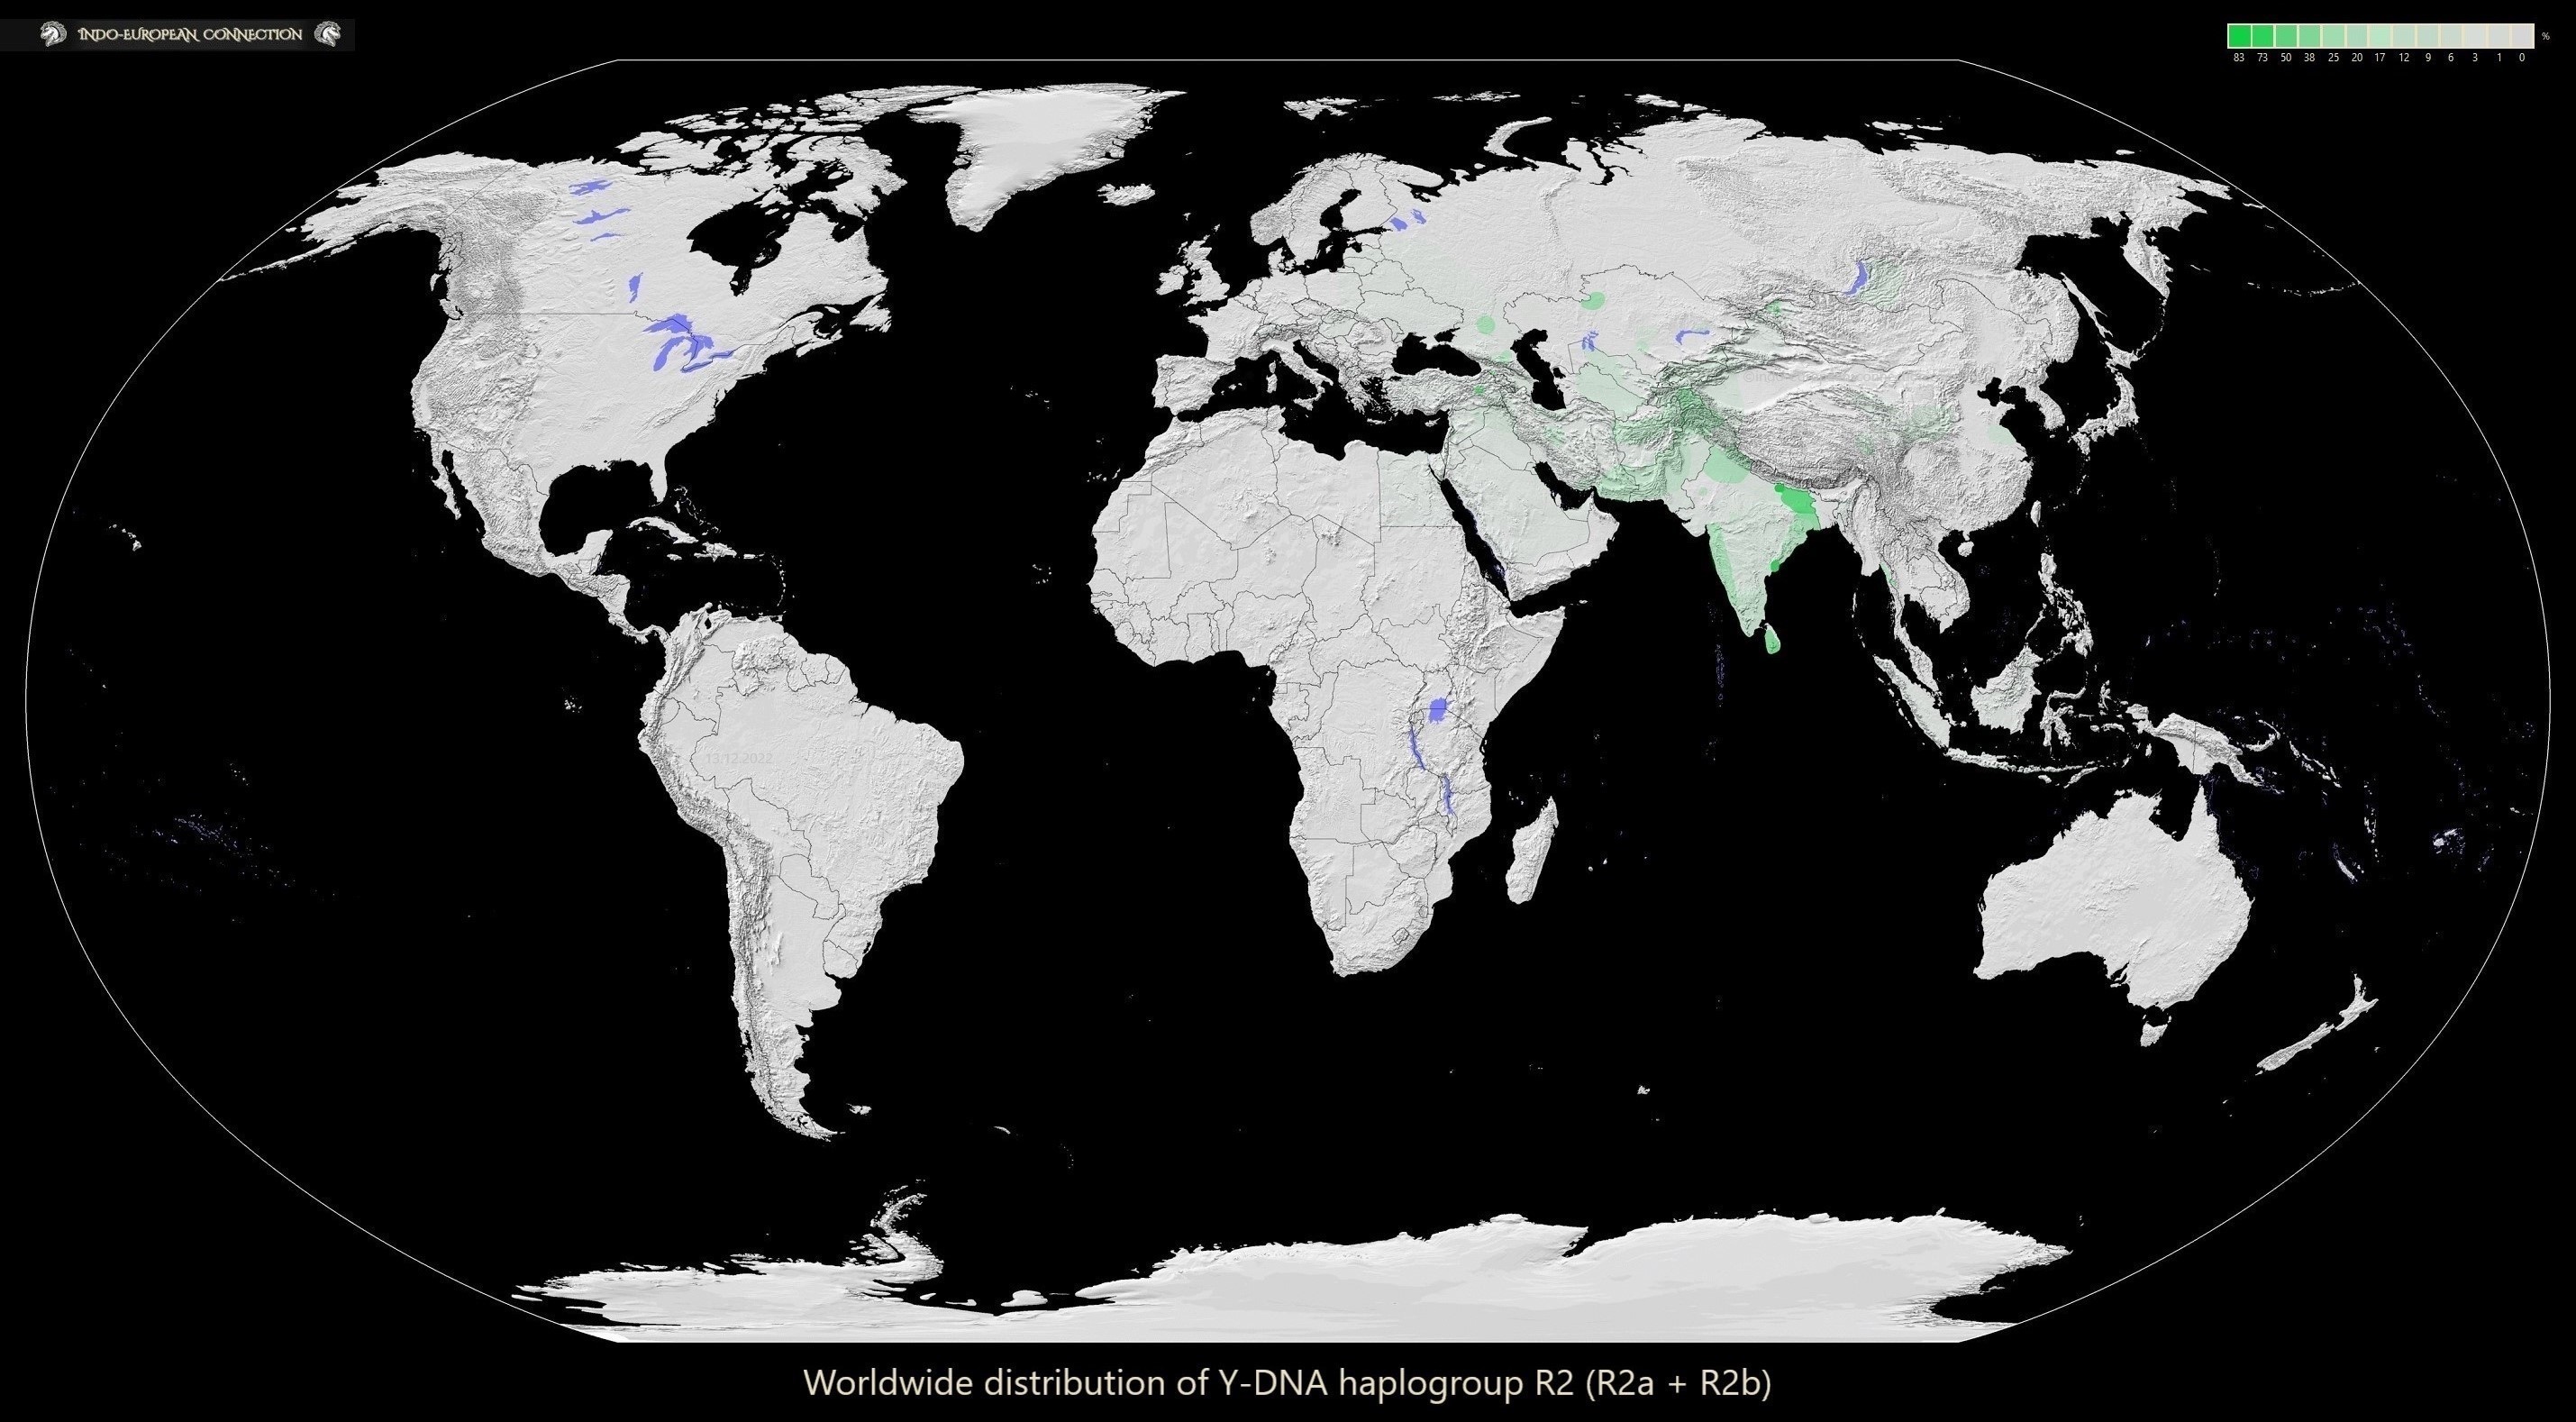 Heatmap showing the worldwide distribution of Y-DNA haplogroup R2 in green color. The green color does not appear outside Eurasia and has the highest brightness in South Asia and Central Asia. Kazakhstan contains a dot-like pattern of Y-DNA R2 distribution just like China and Iran. In Mongolia the Kalmyk Dörwöds (Dörbet) carry a very high amount of this haplogroup: 15.3%, while the Eastern Mongolia does not have any R2a represented by the green color, it is covered in the light gray color like the rest of the world, especially Americas. The only place close to Mongolia with Y-DNA is the Buryat Republic, where 2.7% of R2a appears. There is also a significant amount of R2a in the Sason district of Turkey and in West-North Thailand in the lands of Mon. North of Caucasus the only green islands on this map are Kalmykia, Ossetia and Chechnya. Eastern Europe is covered in only very faint shade of green because the amount of Y-DNA haplogroup R2a does not exceed 1% there. ©indo-european-connection